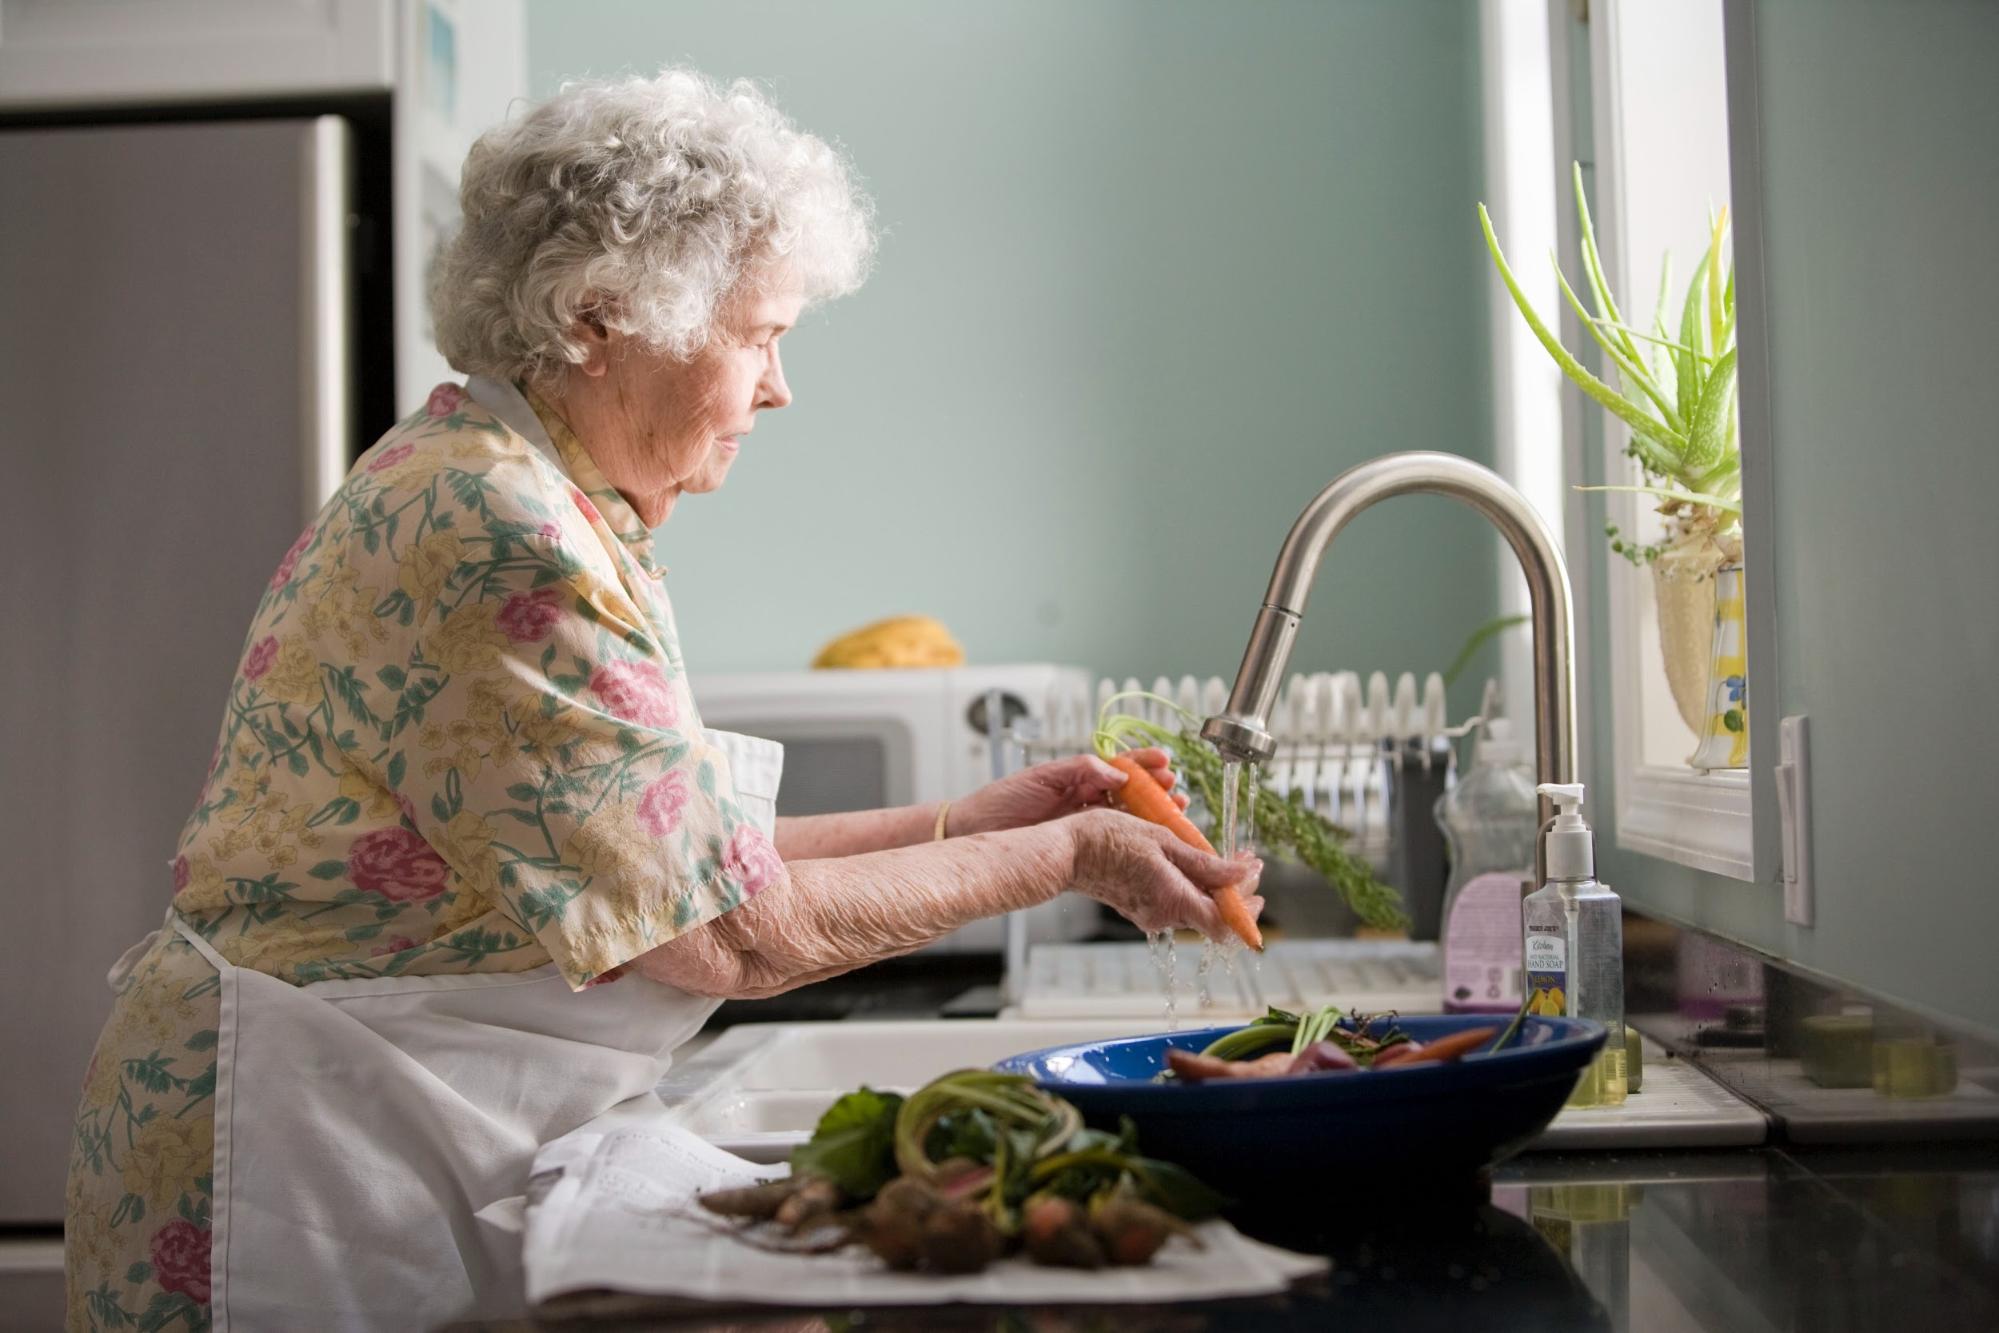 An older lady preparing vegetables in a kitchen at a sink - Dementia Caring at Home - Focus Care